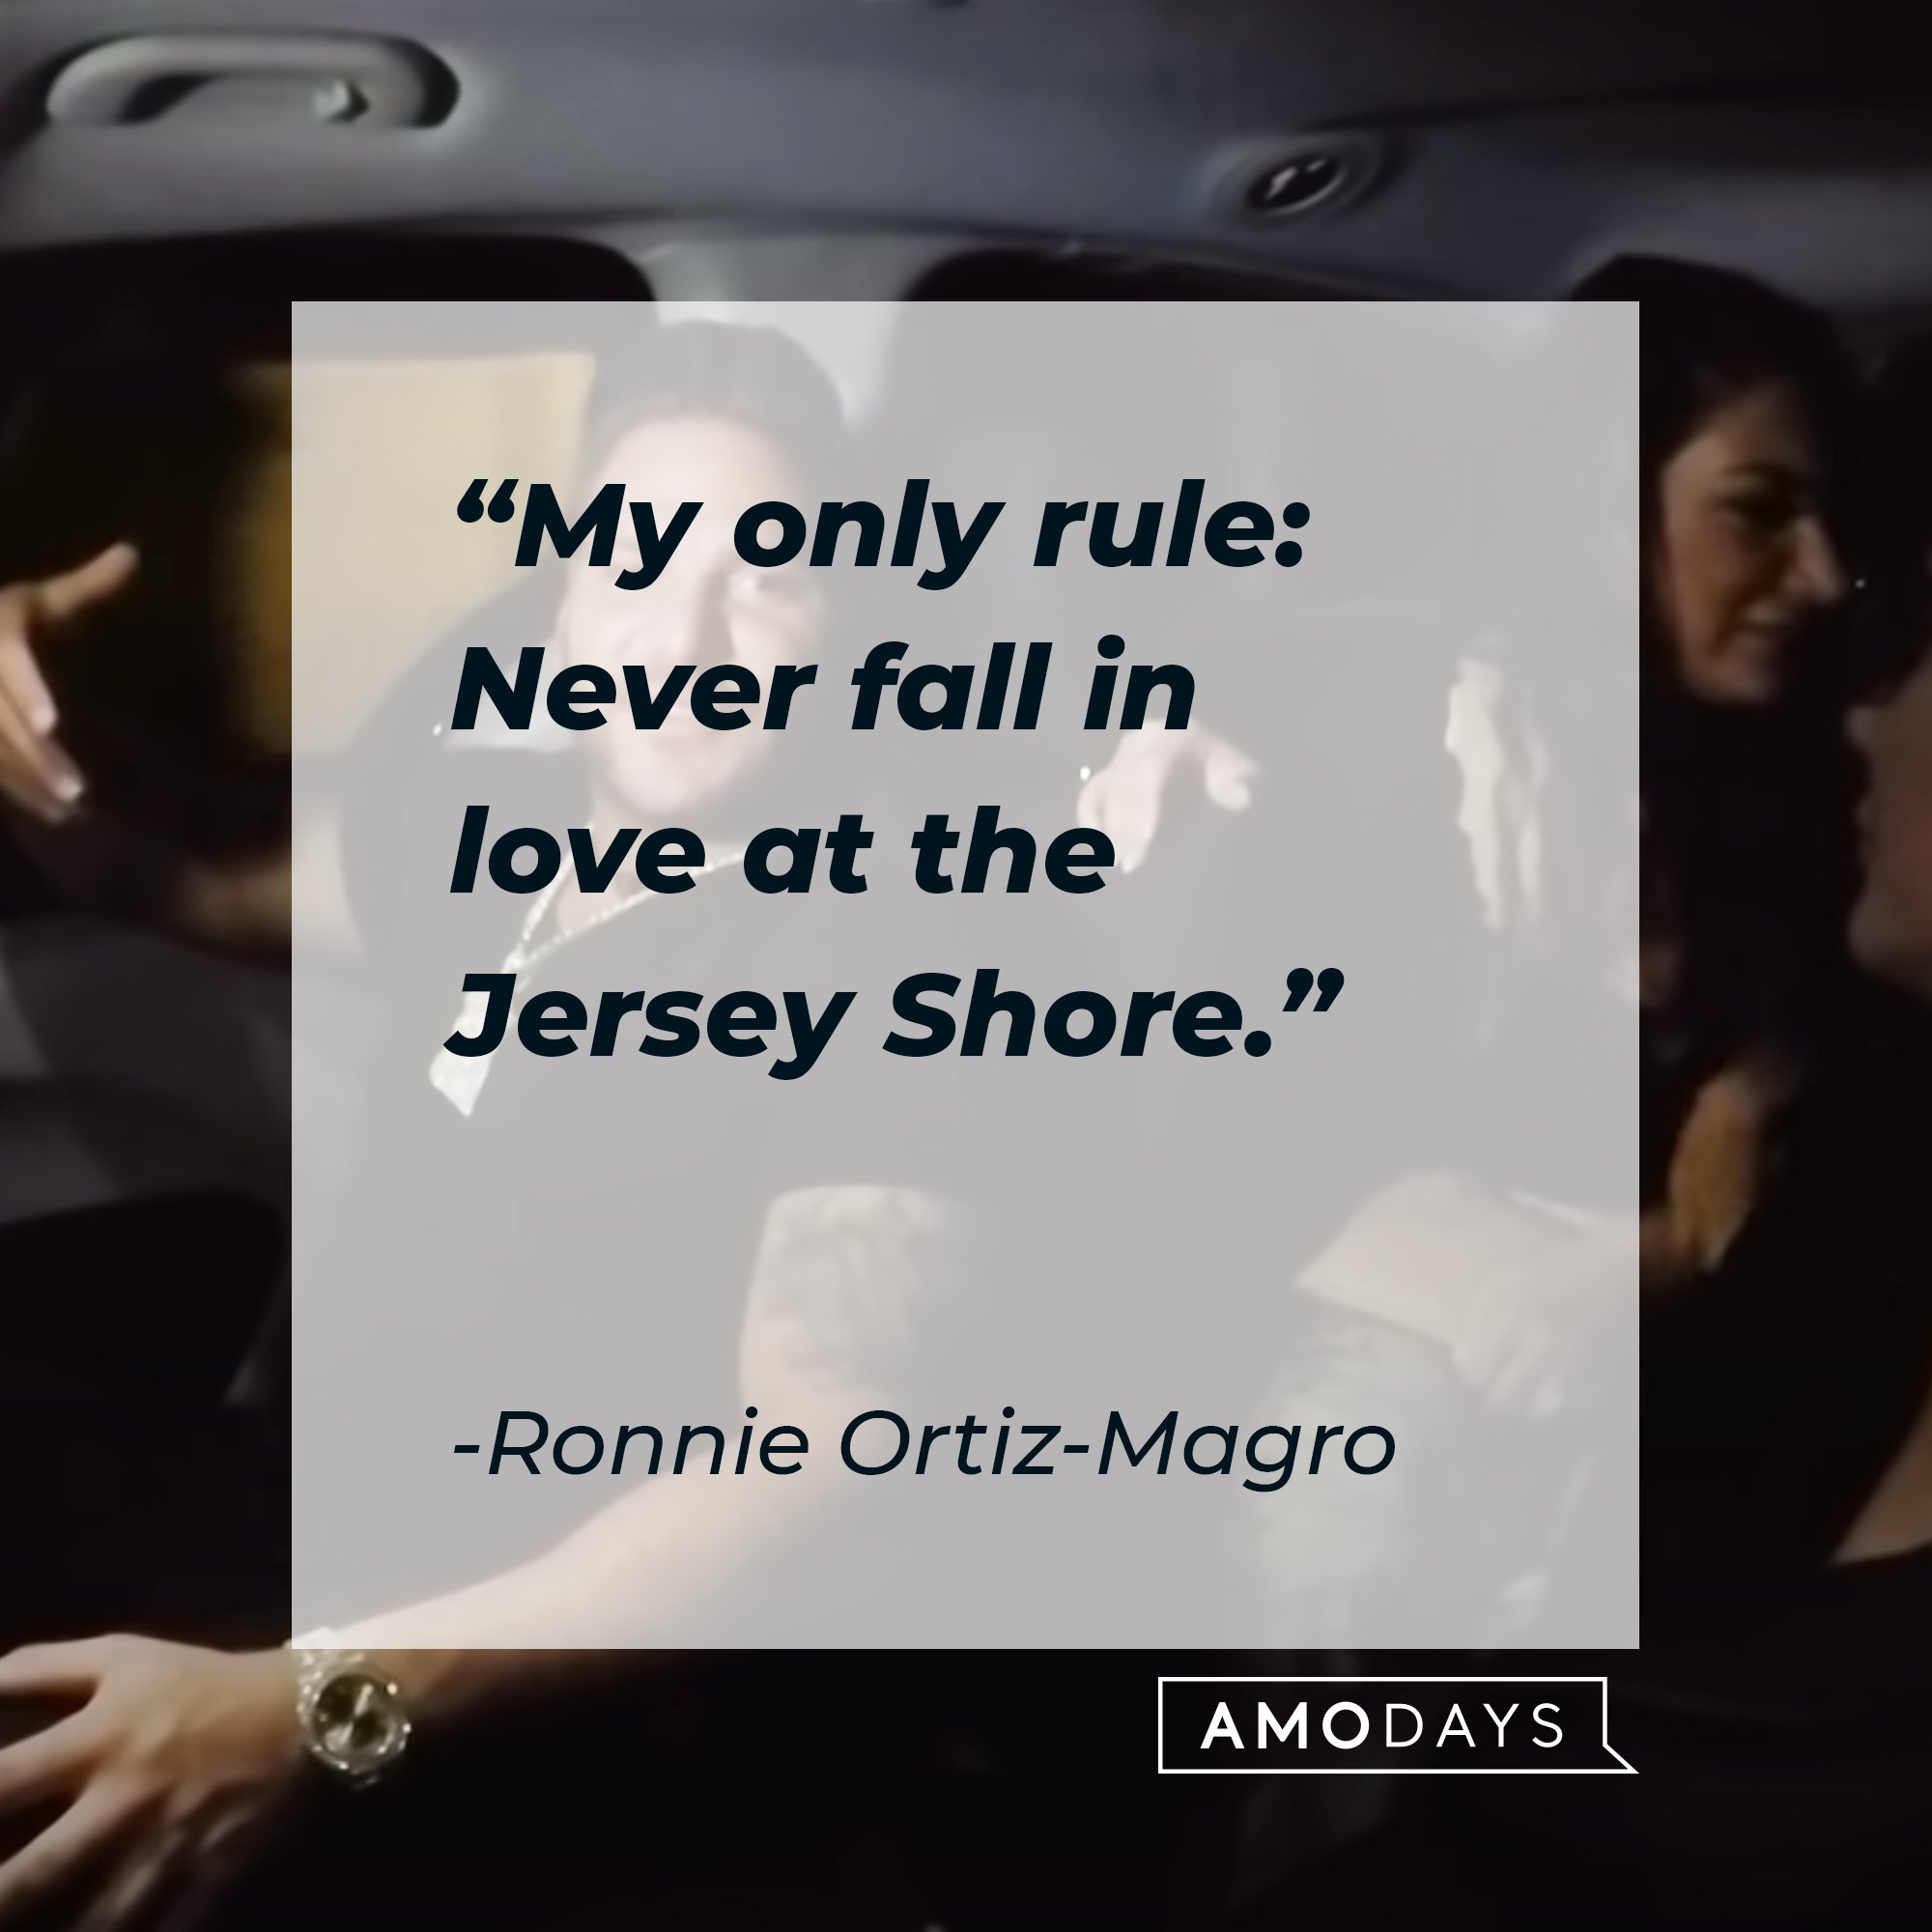  Ronnie Ortiz-Magro’s quote: "My only rule: Never fall in love at the Jersey Shore." | Image: AmoDays